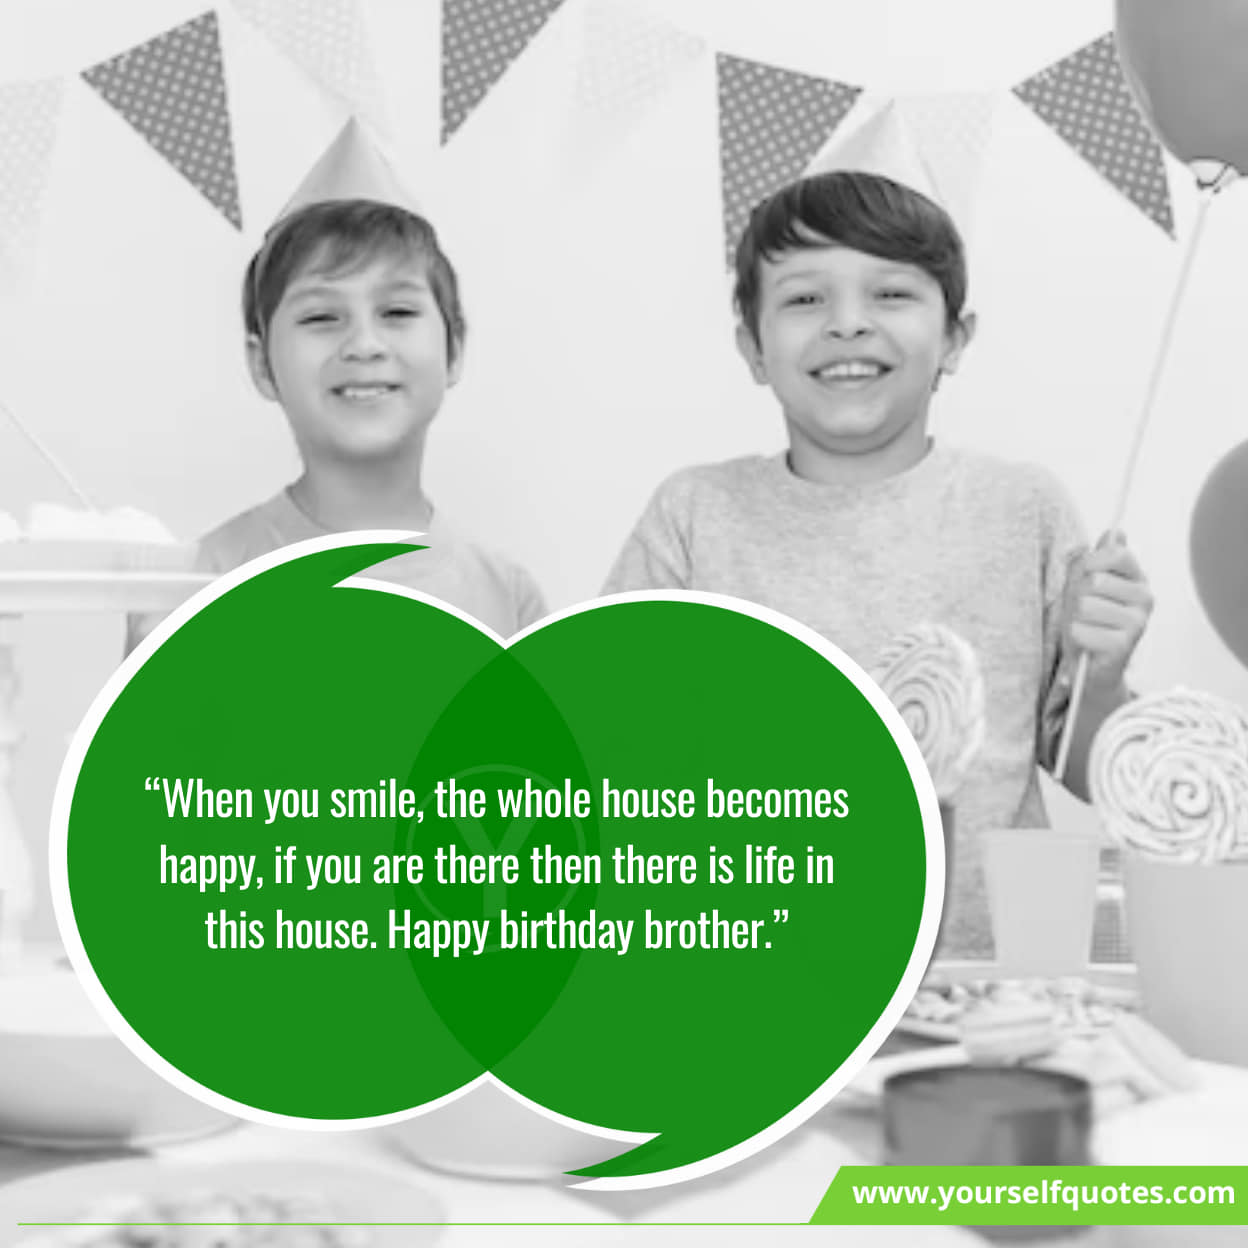 Inspirational birthday wishes for brother